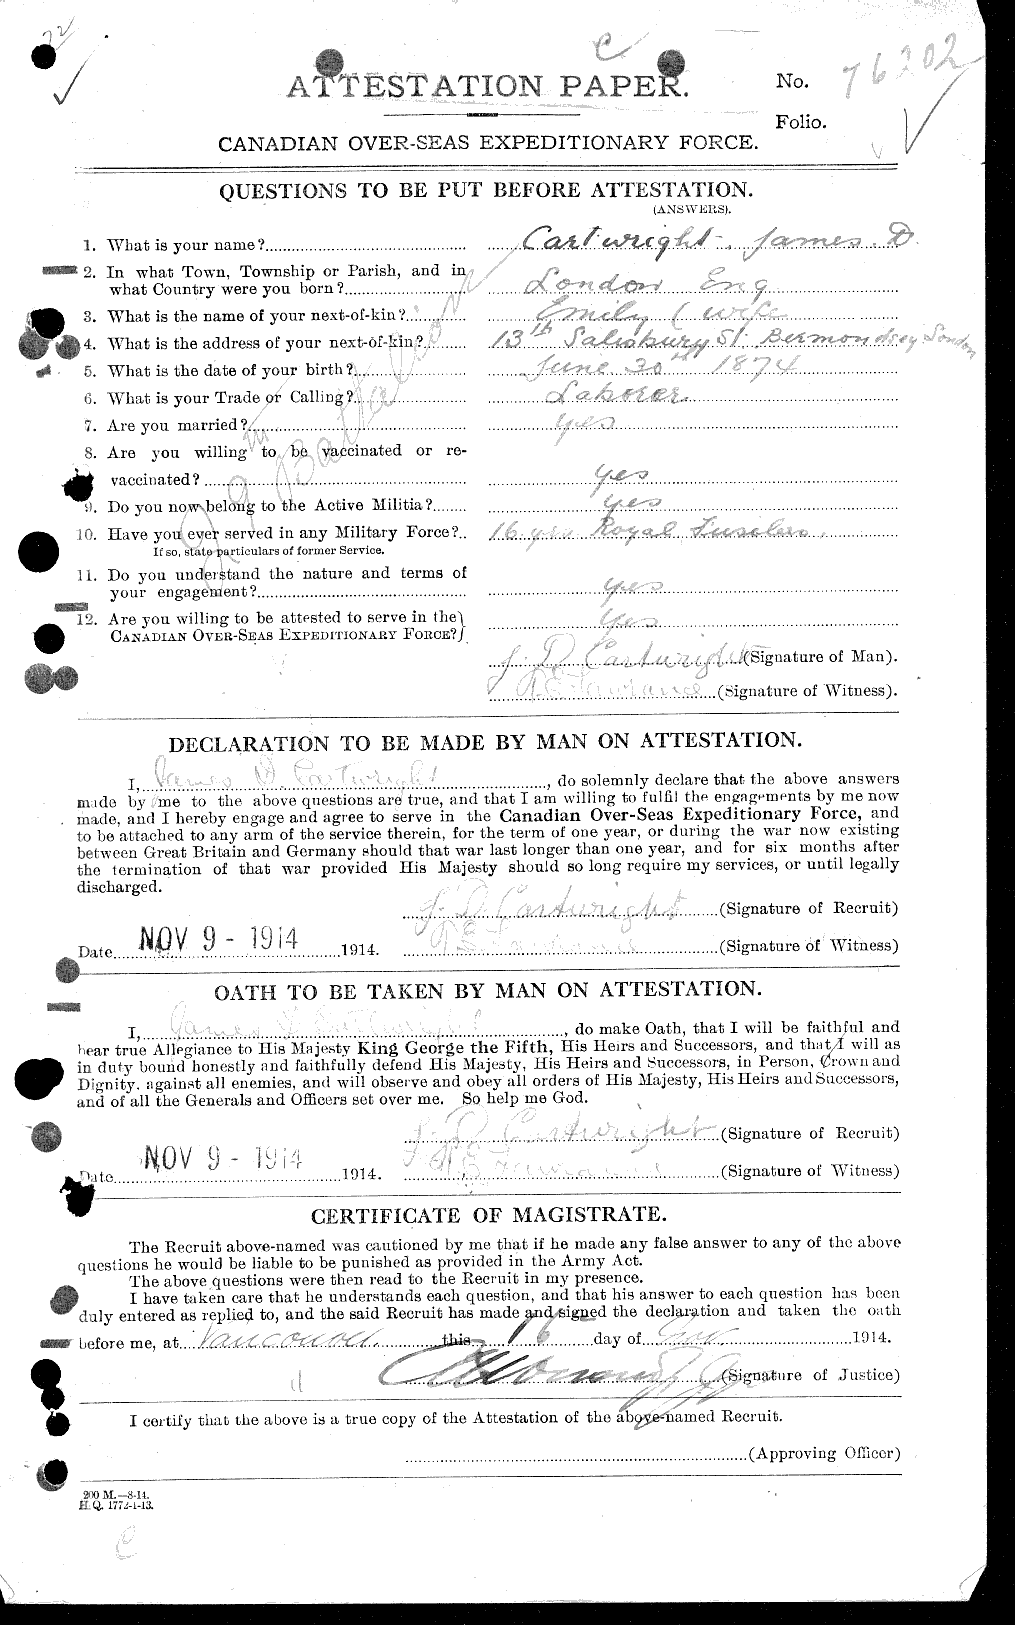 Personnel Records of the First World War - CEF 011594a